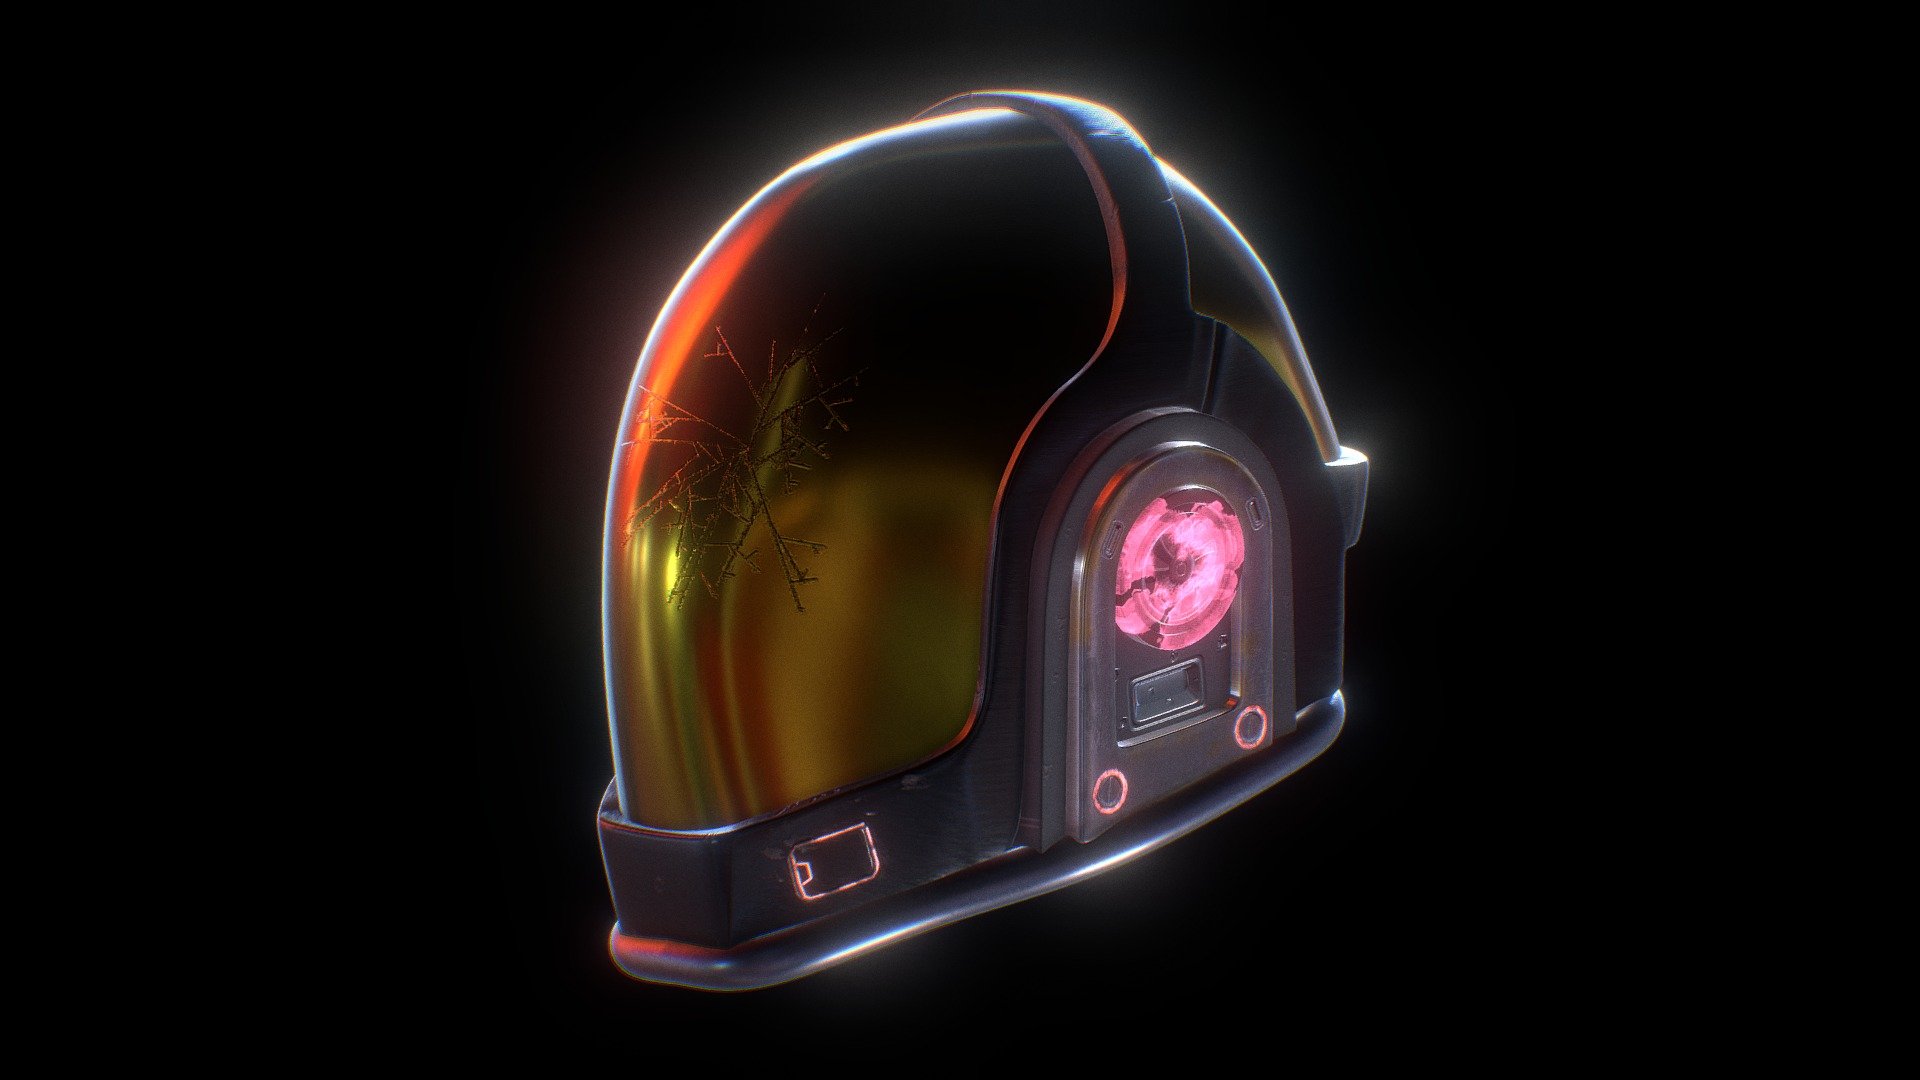 A Futuristic Helmet project I did on Maya &amp; then exported it to Substance Painter

Modeling : Maya,
Texturing : Substance Painter - Futuristic Helmet - 3D model by Omar77 3d model